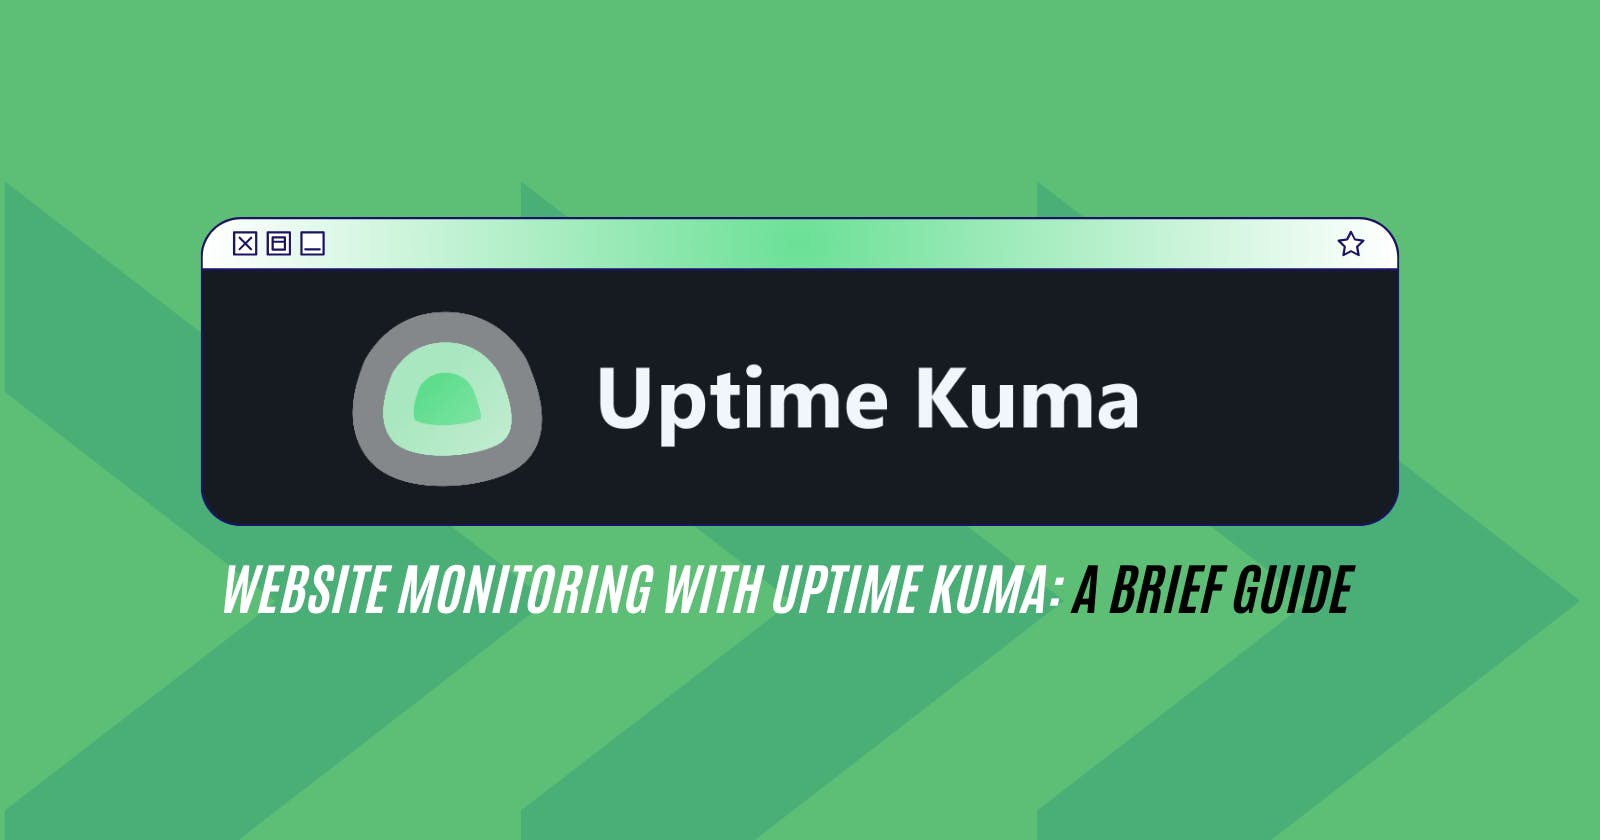 Website Monitoring with Uptime Kuma: 
A Brief Guide